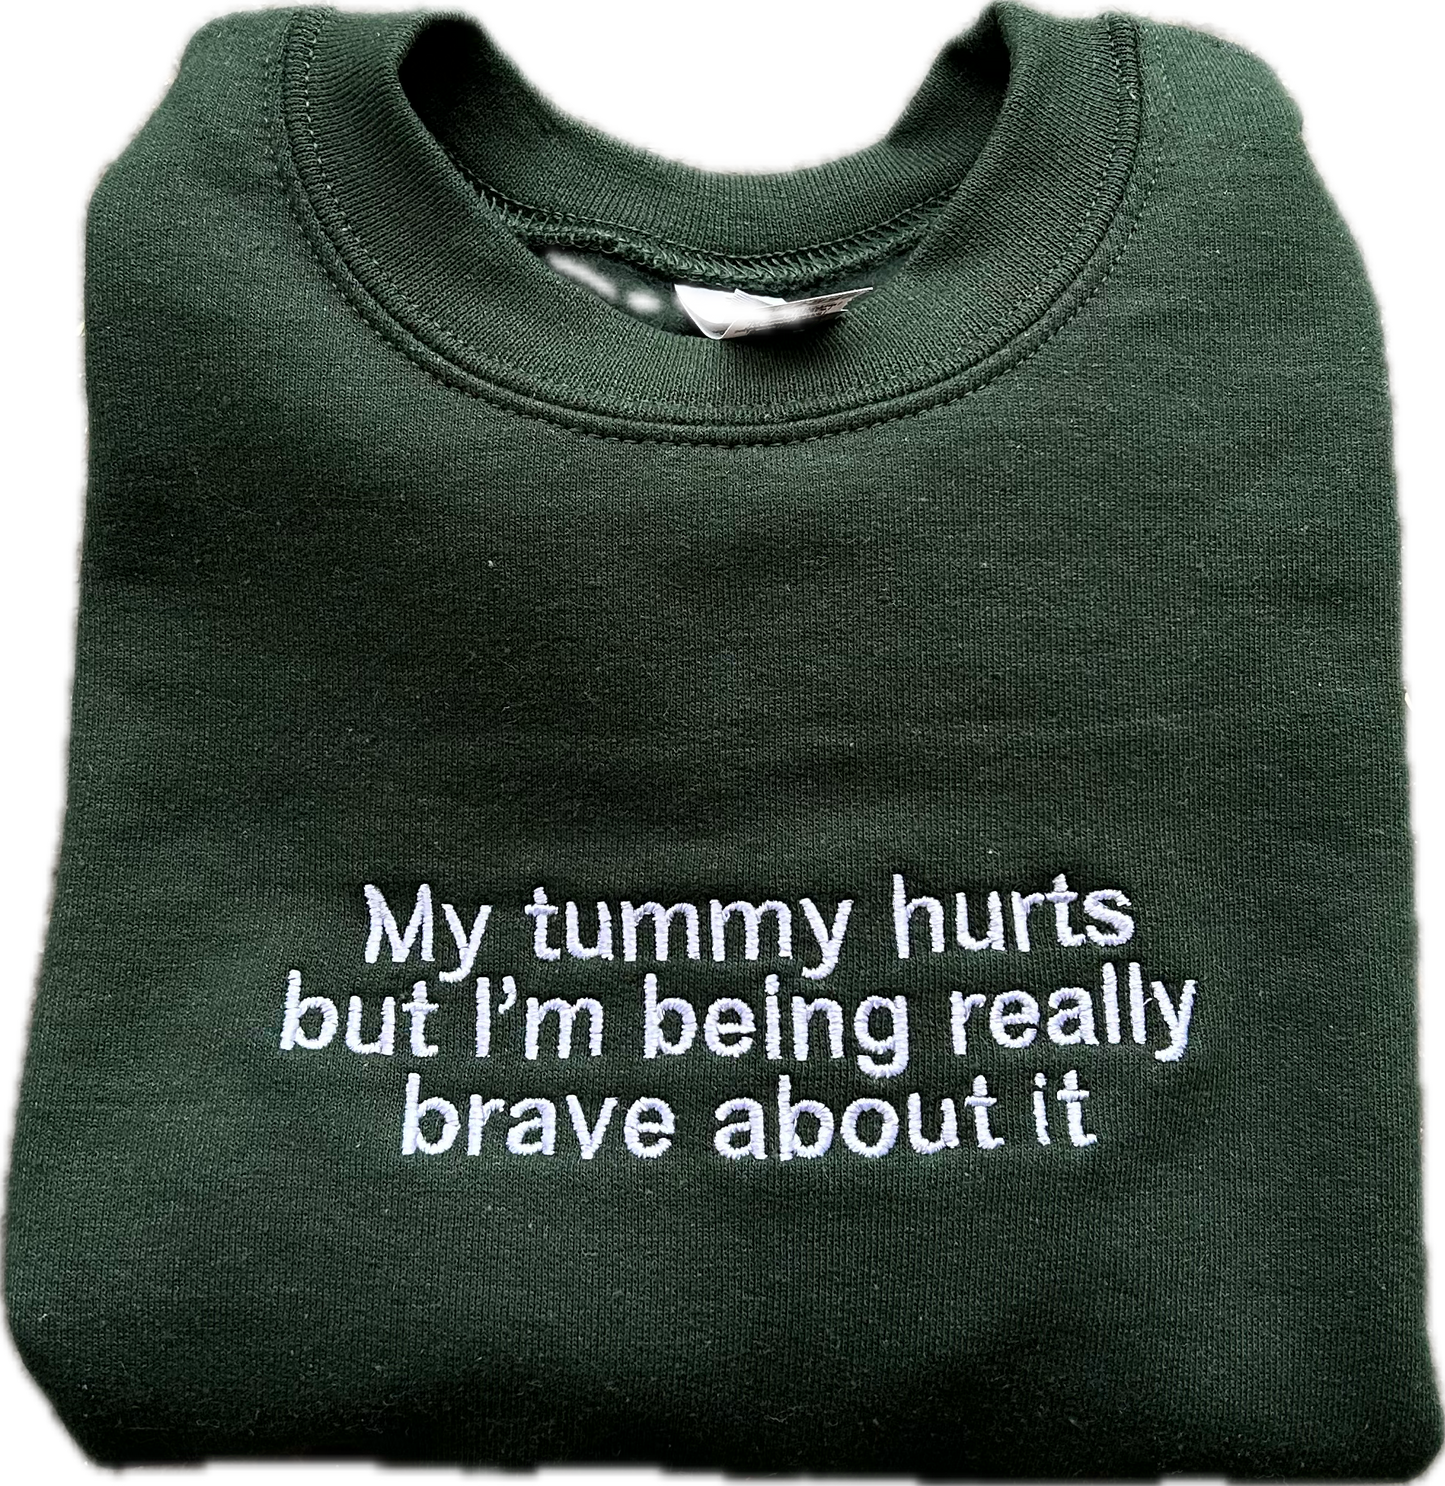 Youth Embroidered 'My Tummy Hurts but I'm being Really Brave about it'  Crew Neck, Long Sleeve, Classic fit, Unisex, Youth